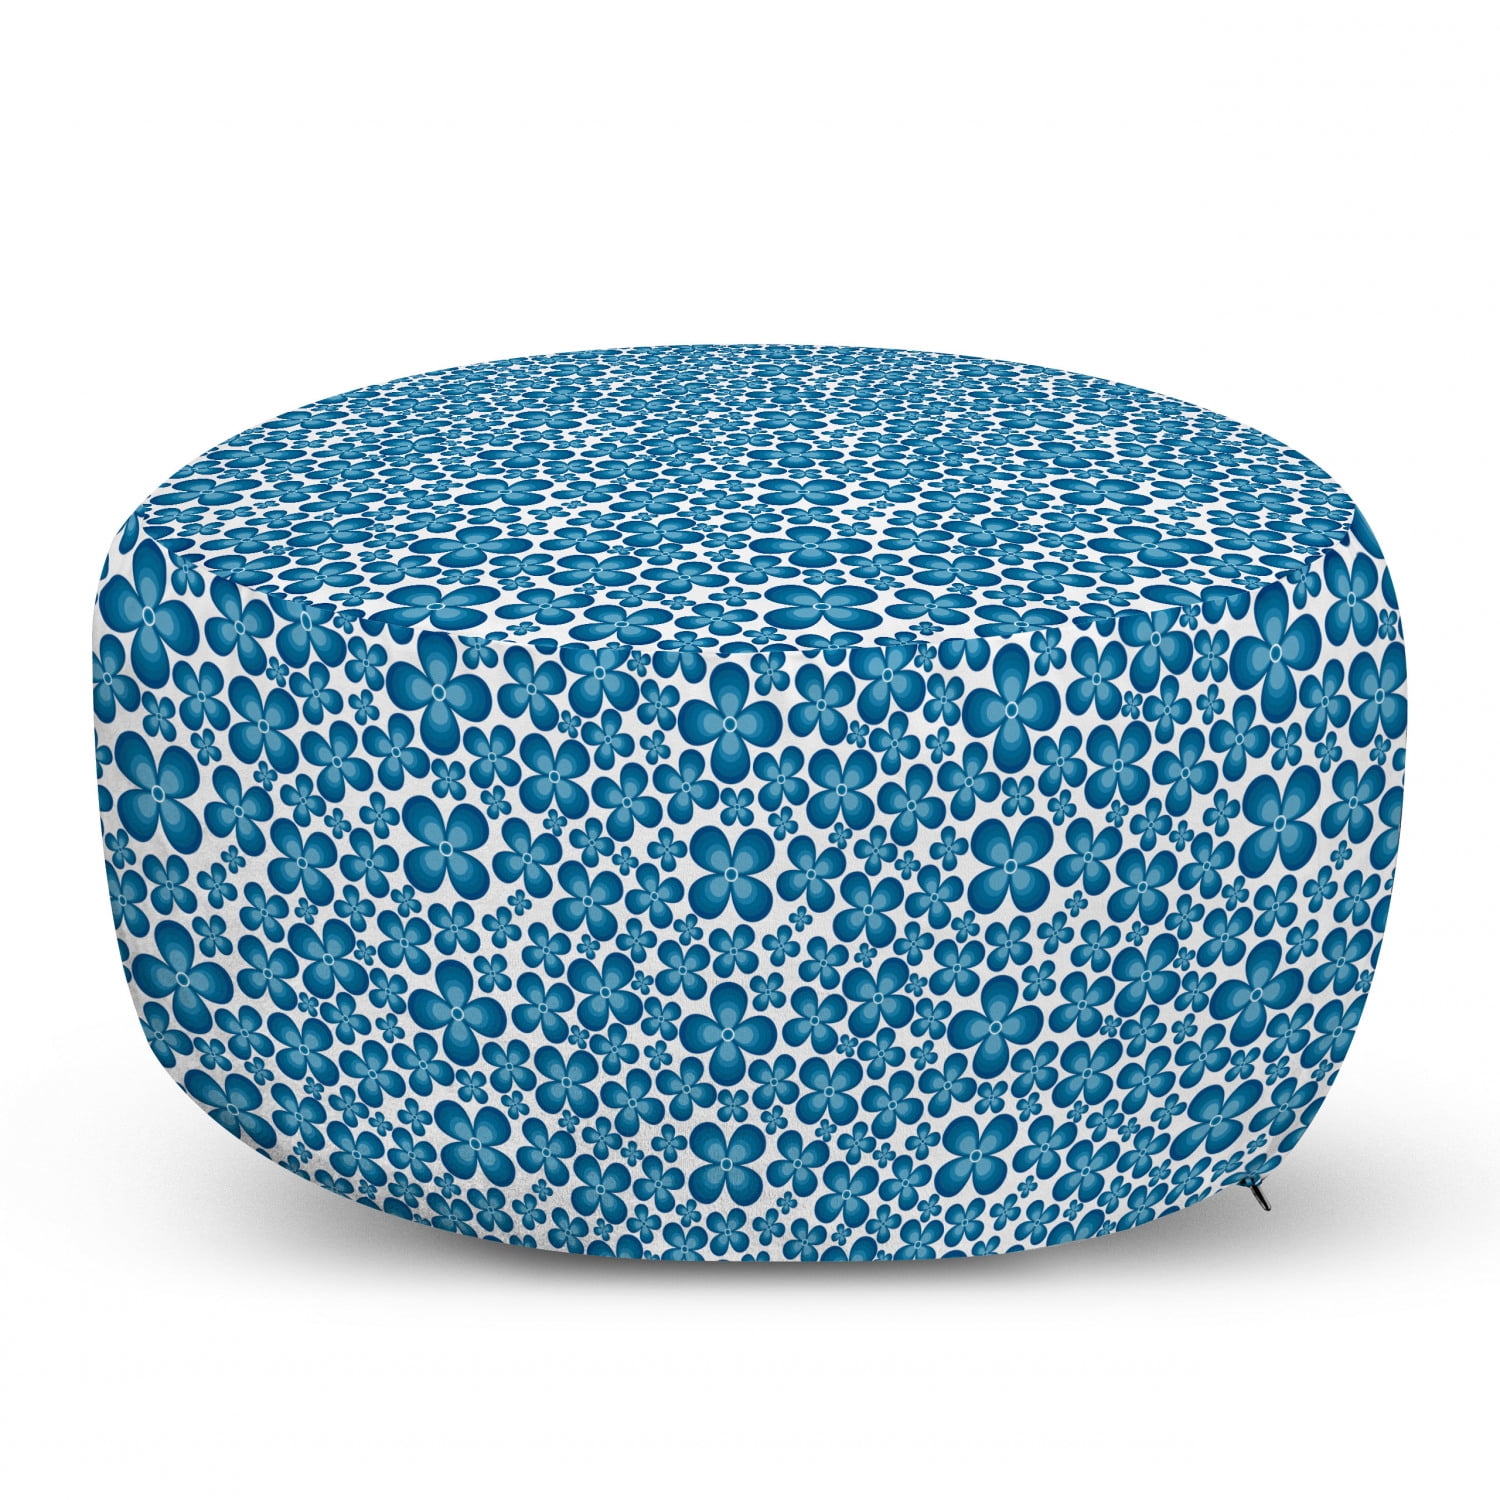 Petrol Blue and White 25 Ambesonne Modern Rectangle Pouf Botanical Design Leafy Branches on Monochromatic Background Illustration Under Desk Foot Stool for Living Room Office Ottoman with Cover